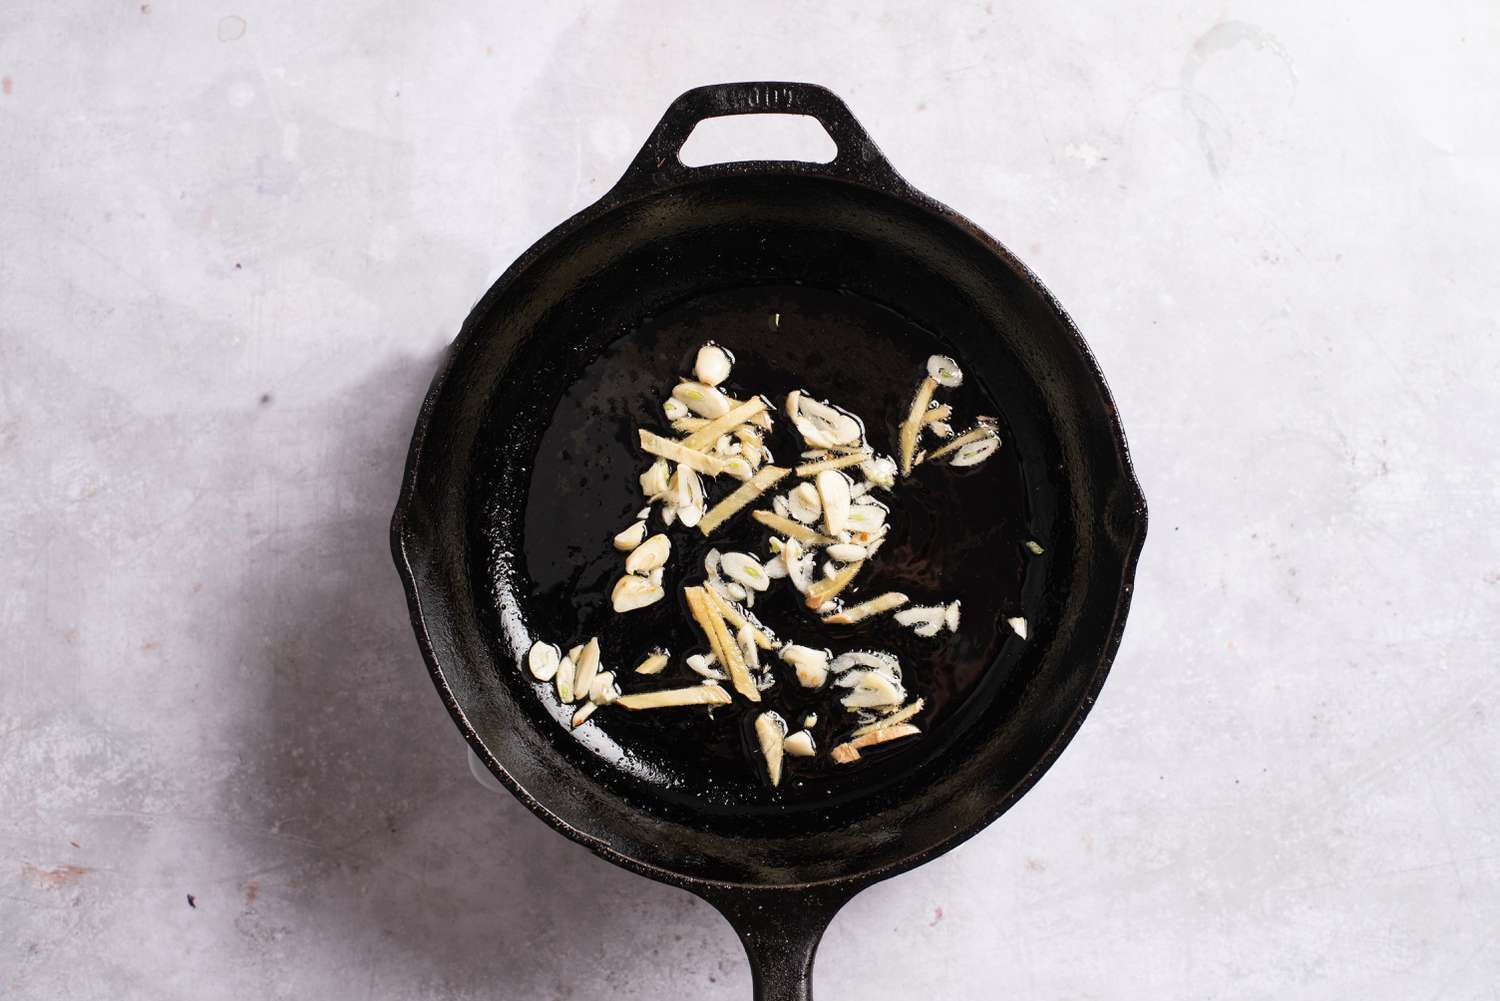 Ginger and garlic cooking in a pan